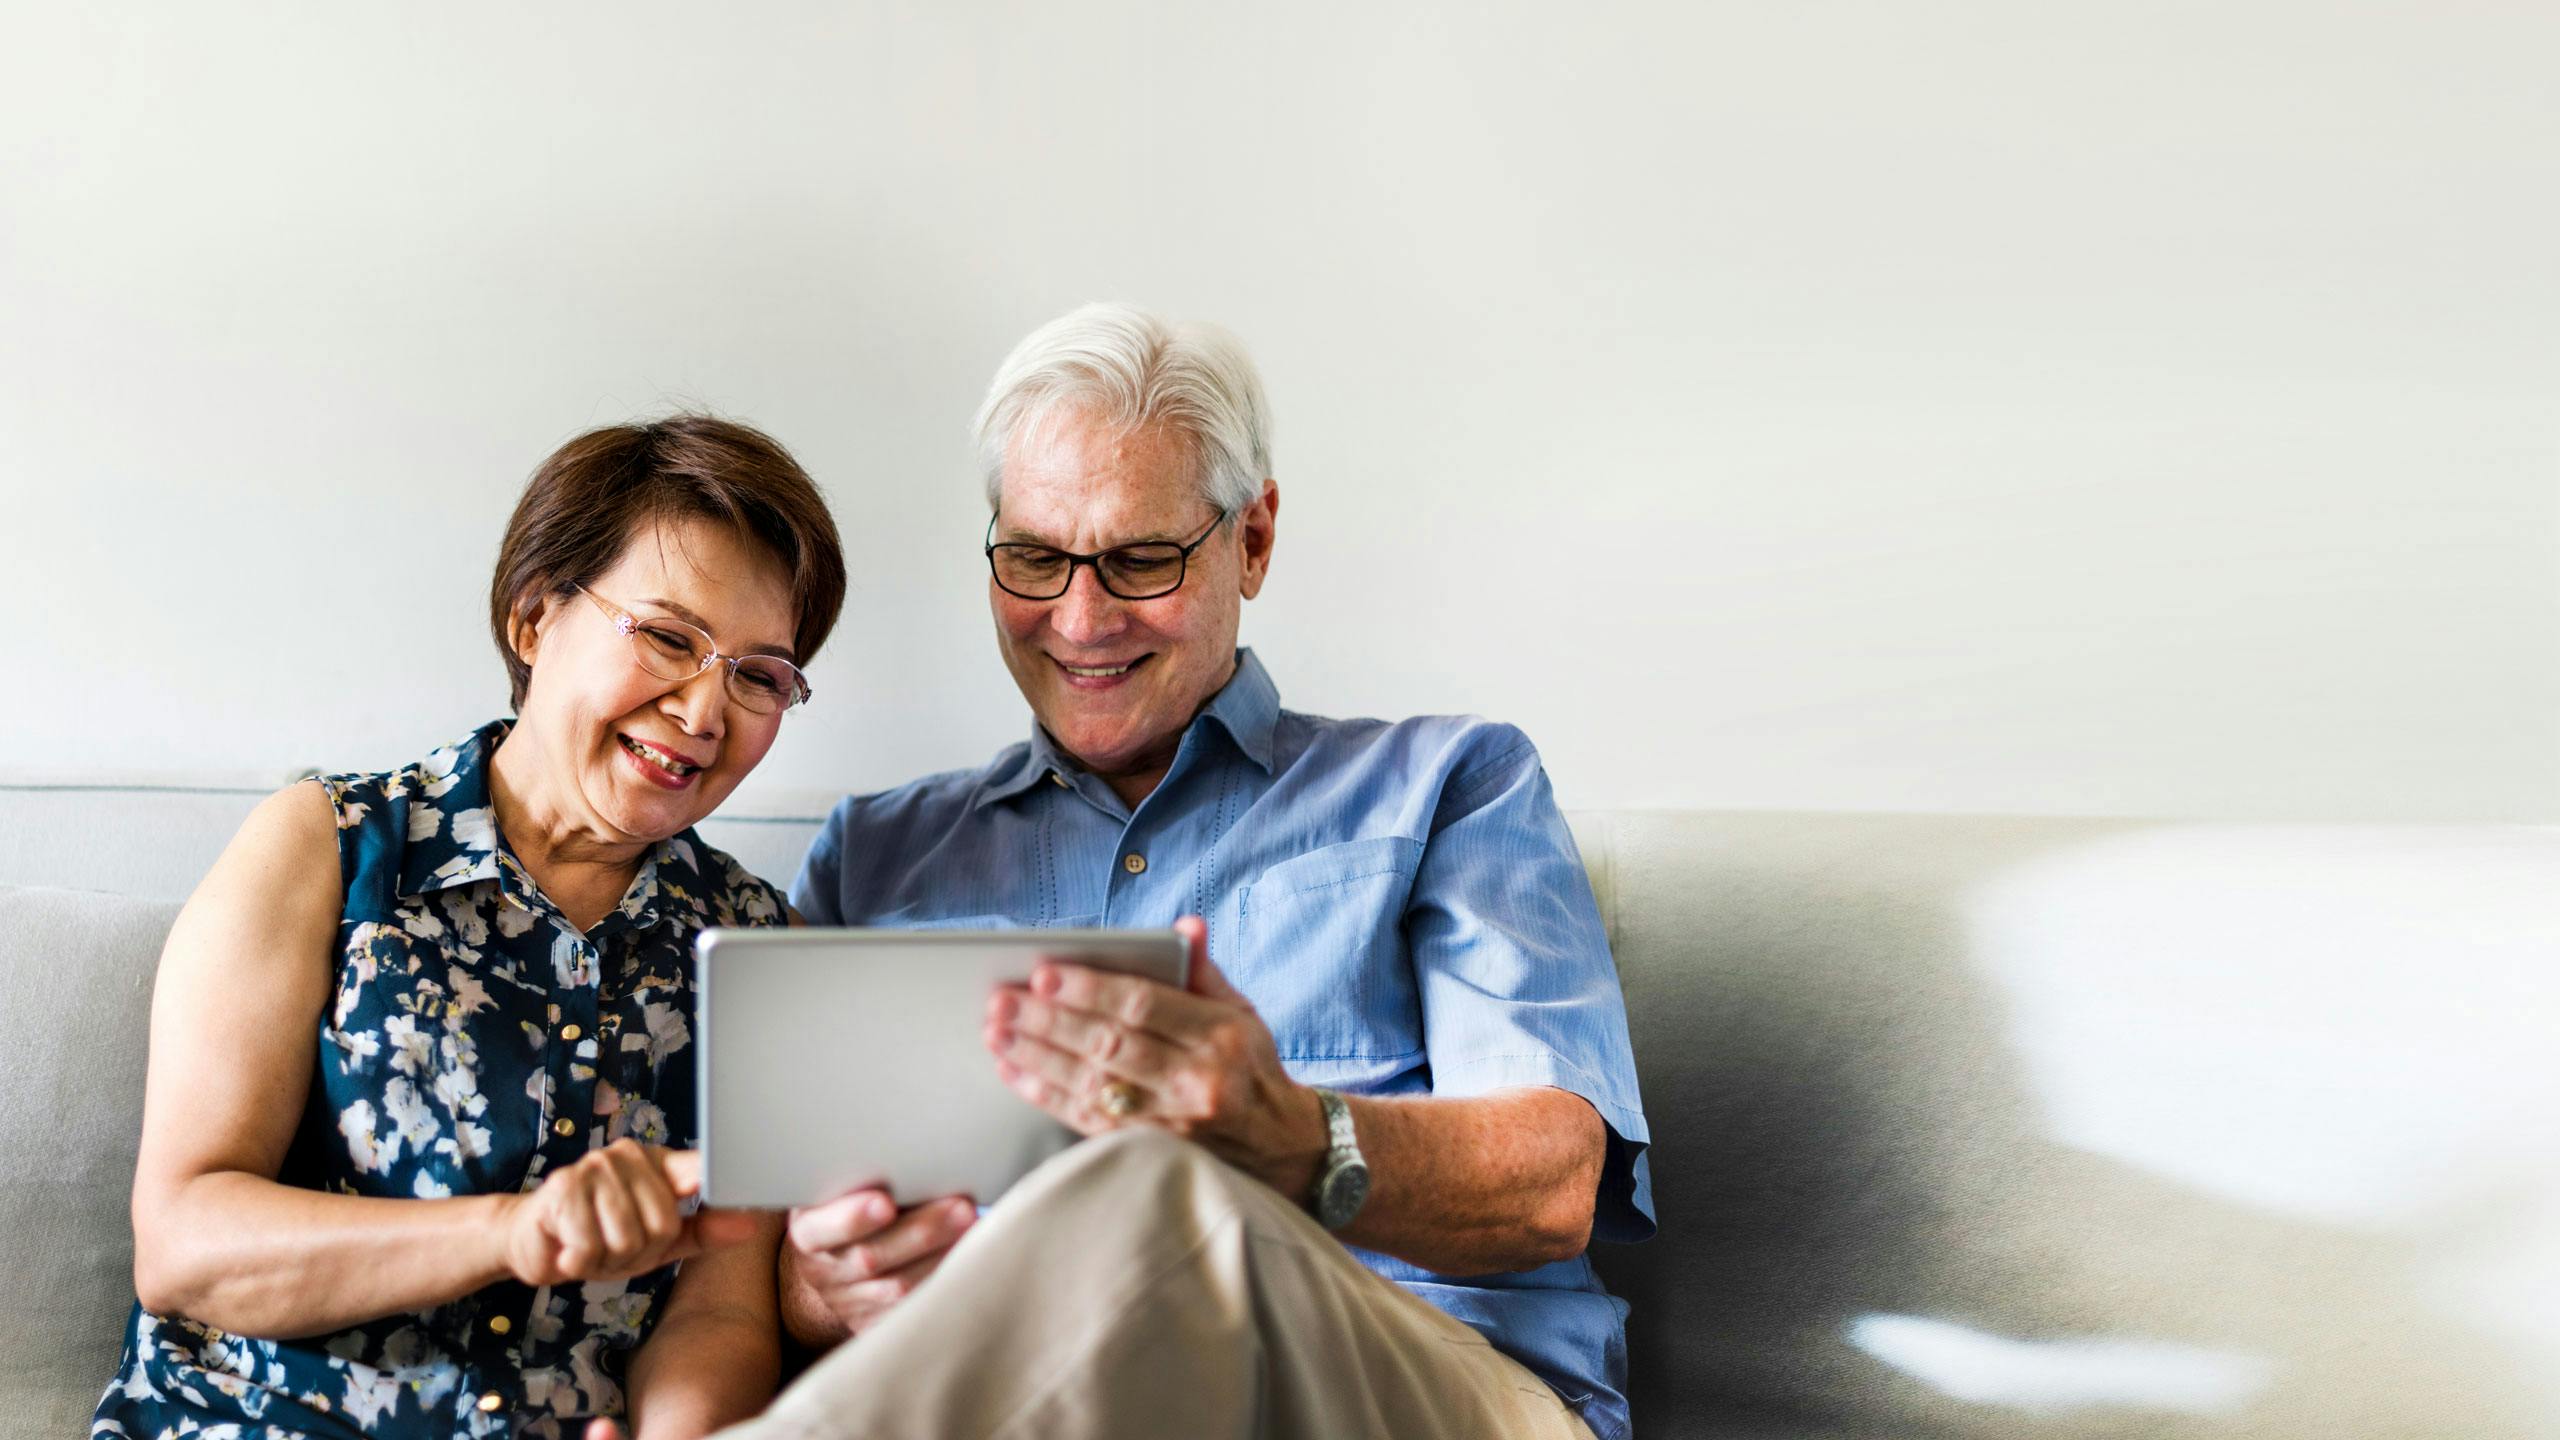 An older couple sitting on the sofa smiling, while looking at a tablet